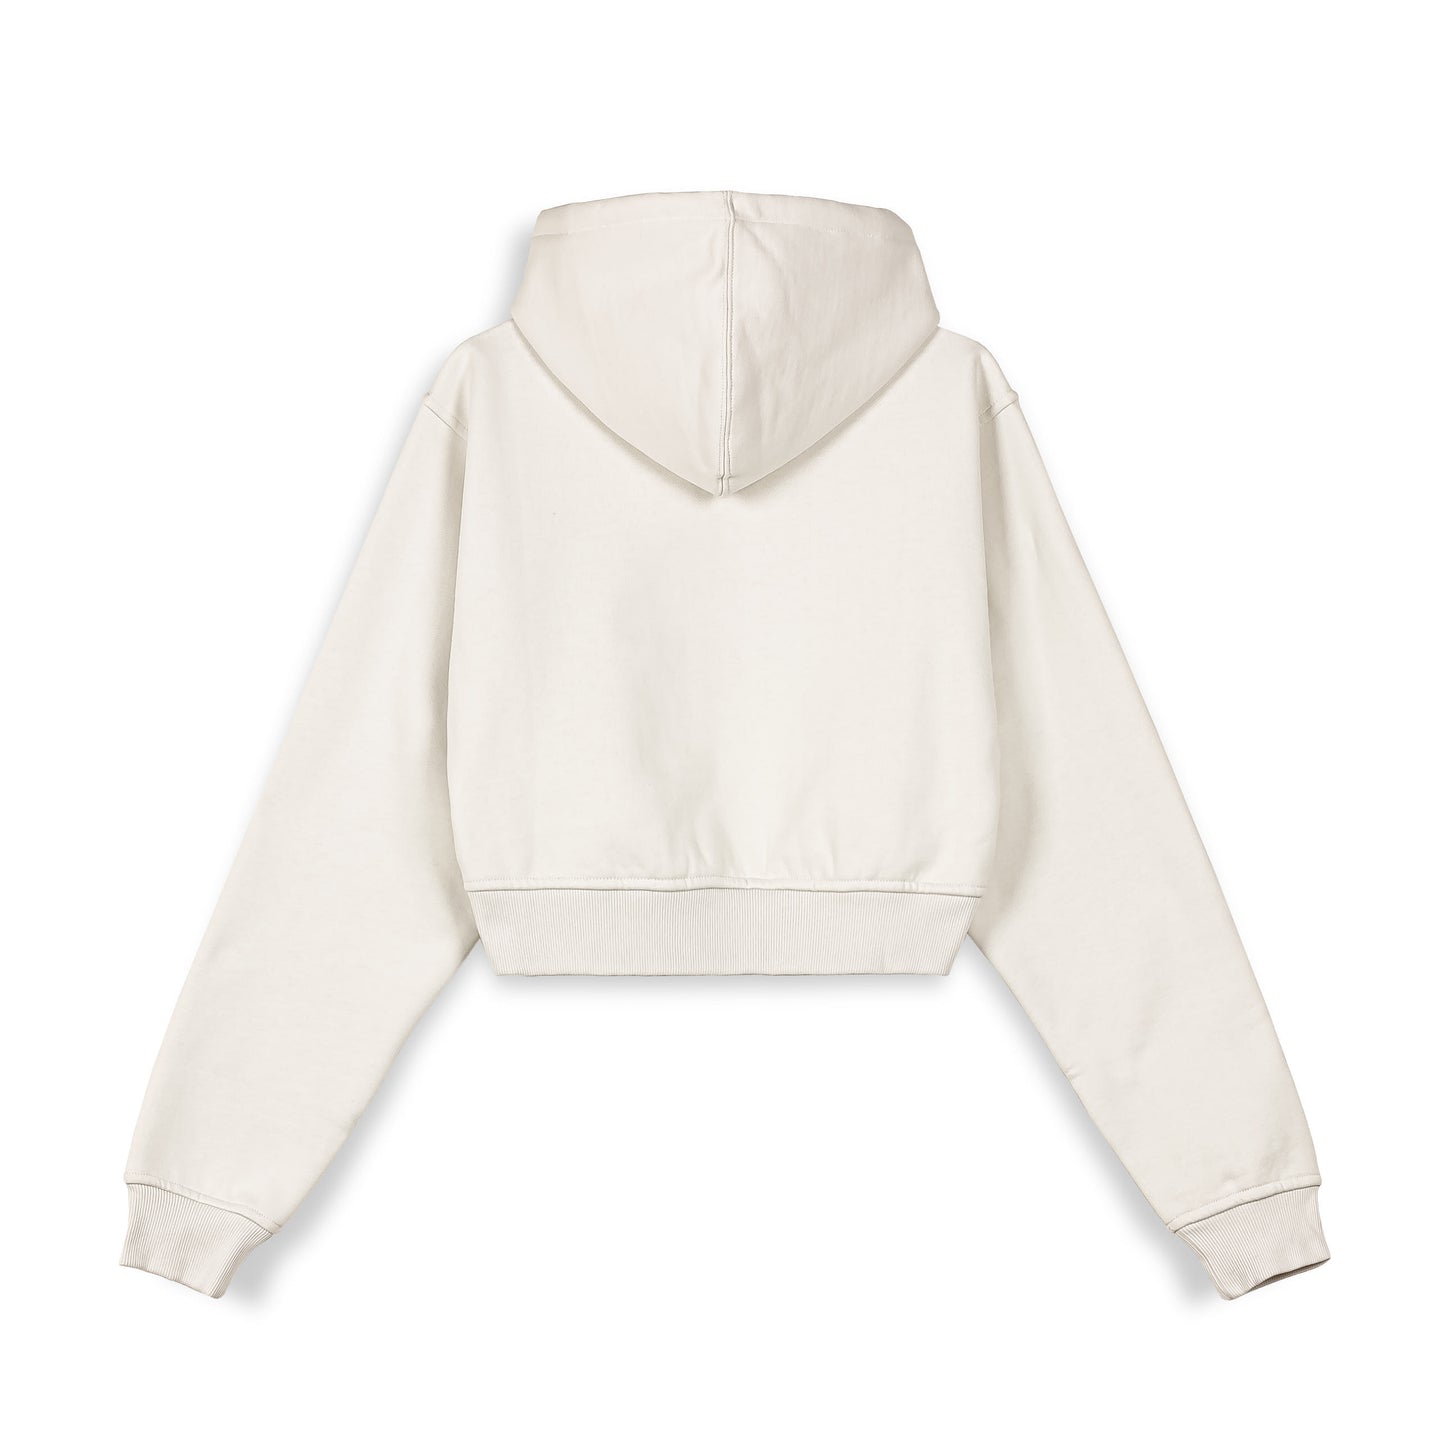 MADRID HEAVYWEIGHT THE CONNOISSEUR GIRL CROP HOODIE BICOLOR